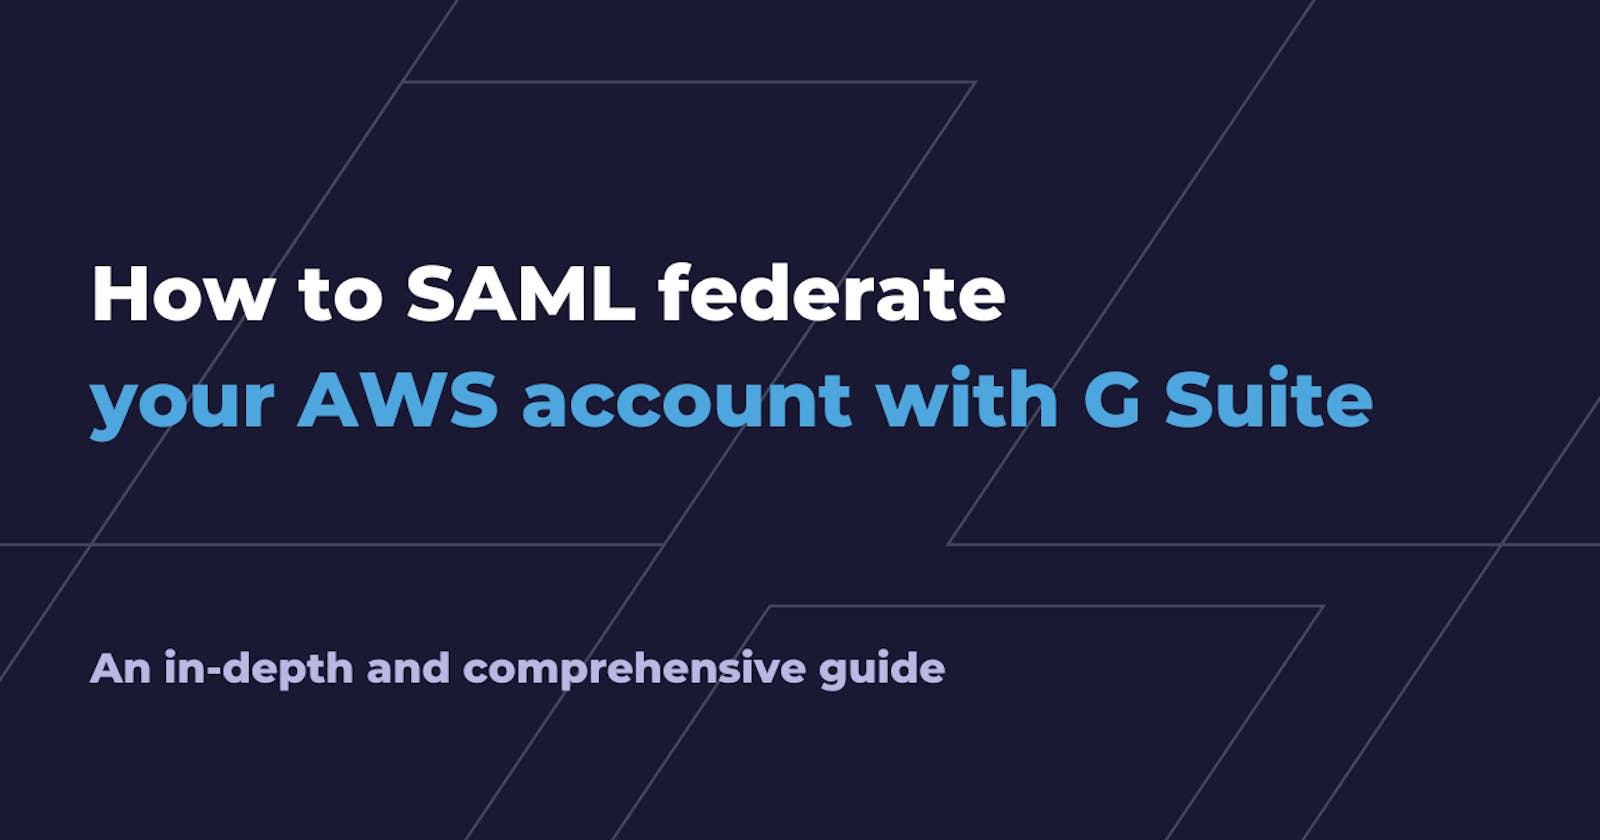 How to SAML federate your AWS account with G Suite